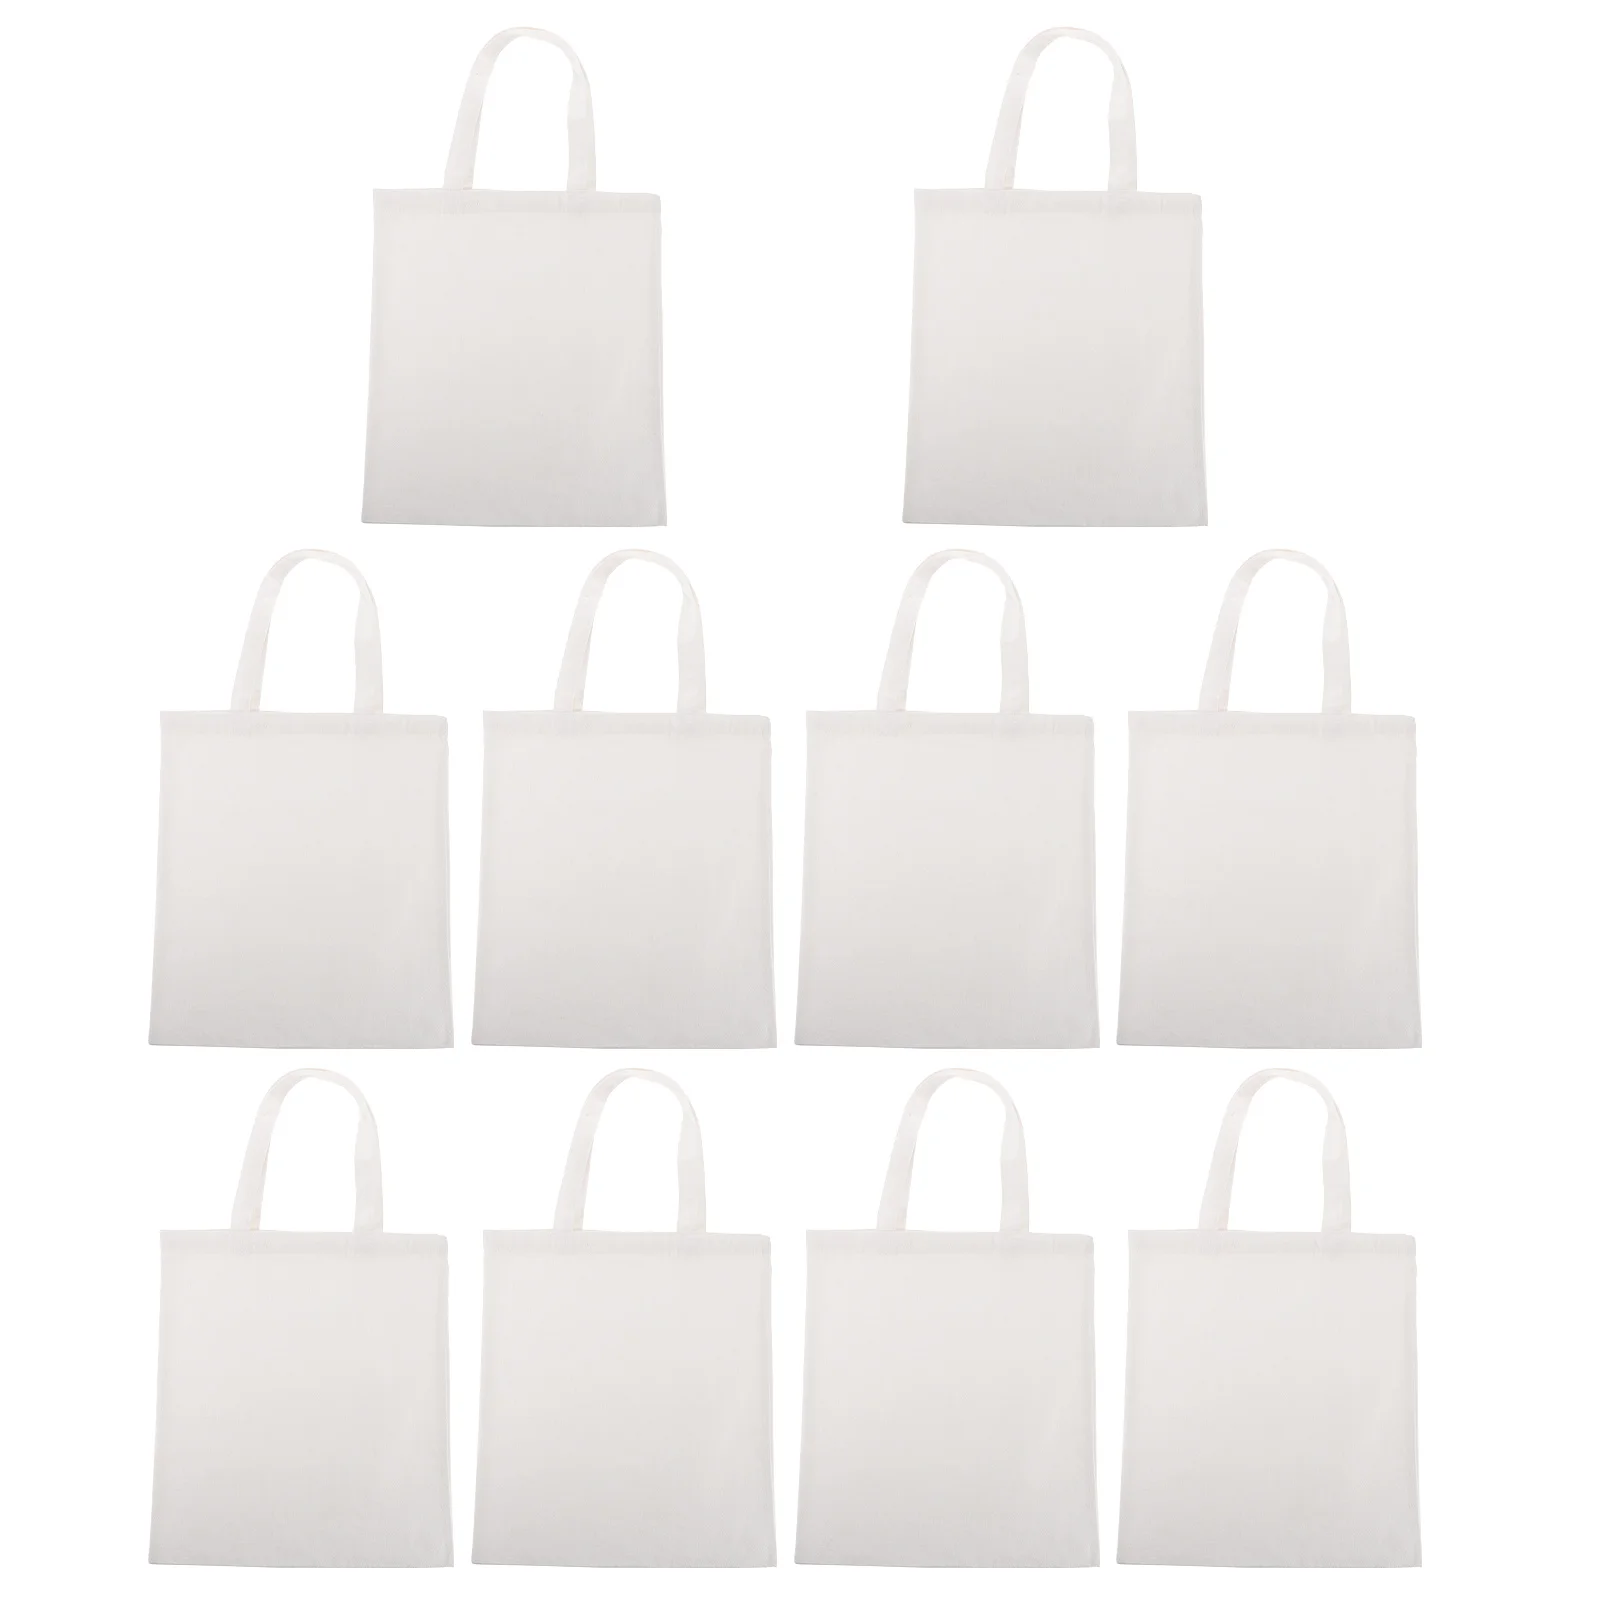 

10 Pcs Thermal Transfer Canvas Bag Grocery Bags Cloth Shopping Tote Blank Pouch Sublimation Washable